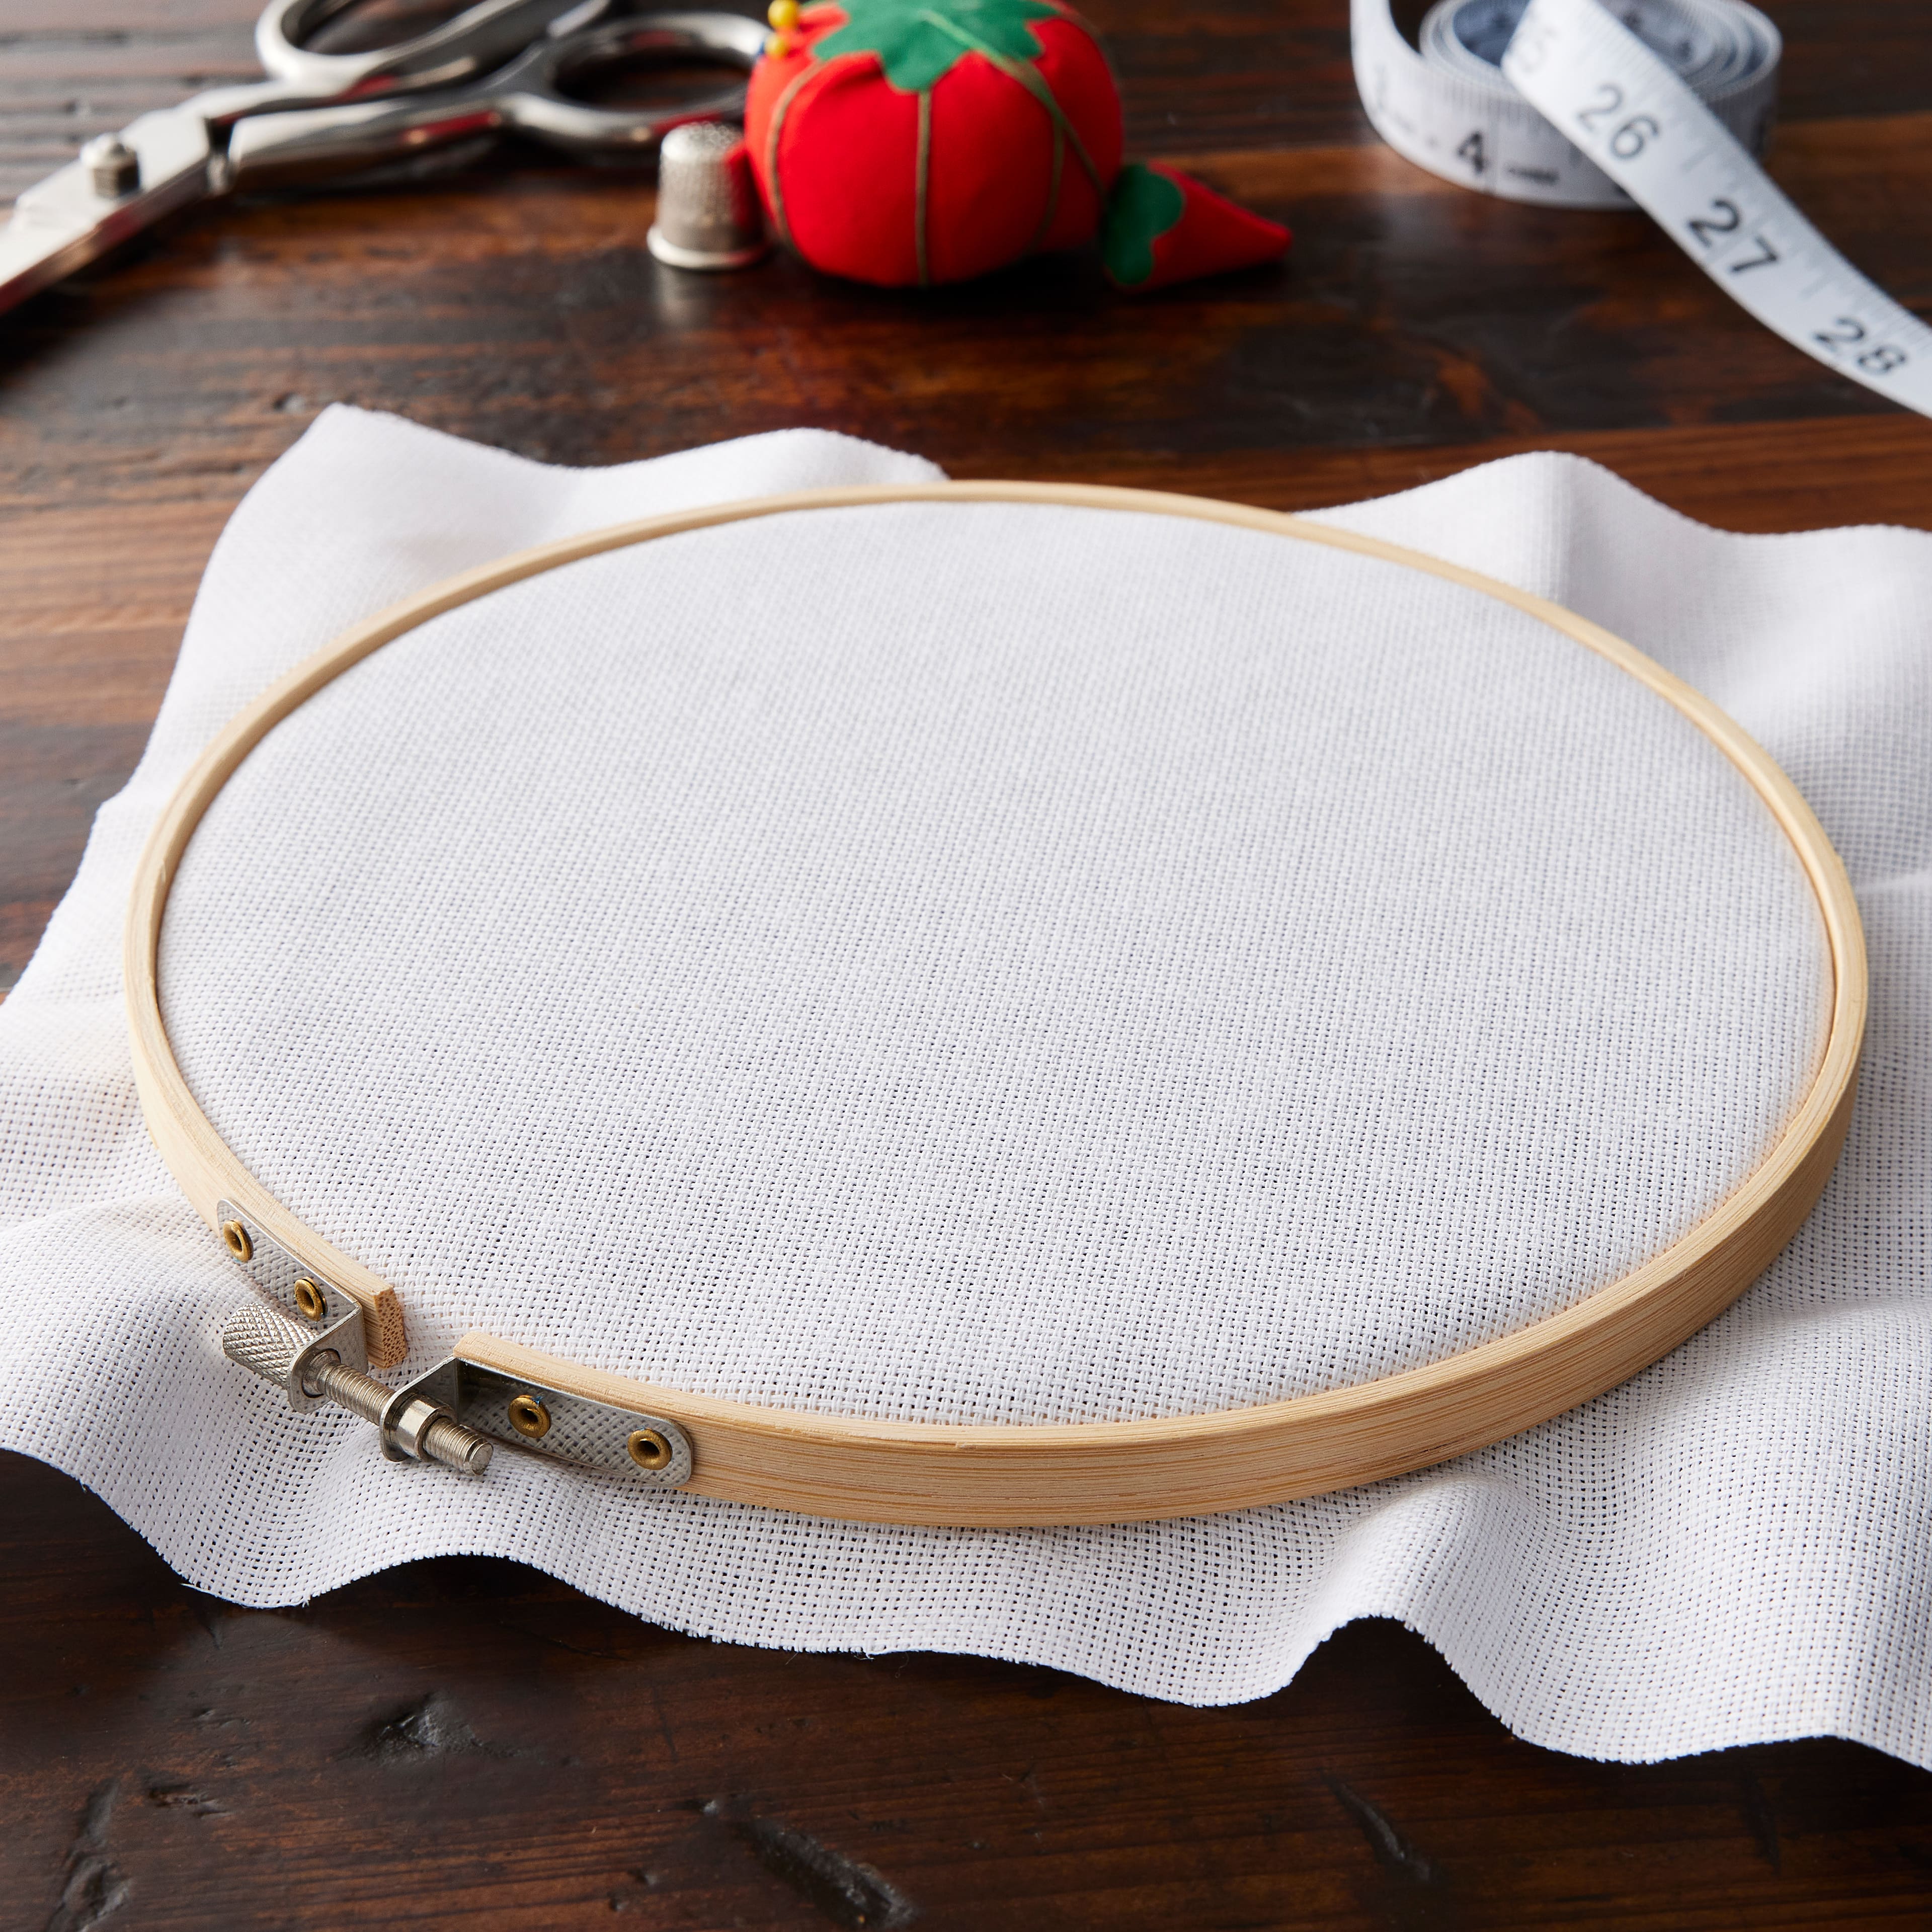 30 Pack: 7 Wooden Embroidery Hoop by Loops & Threads™